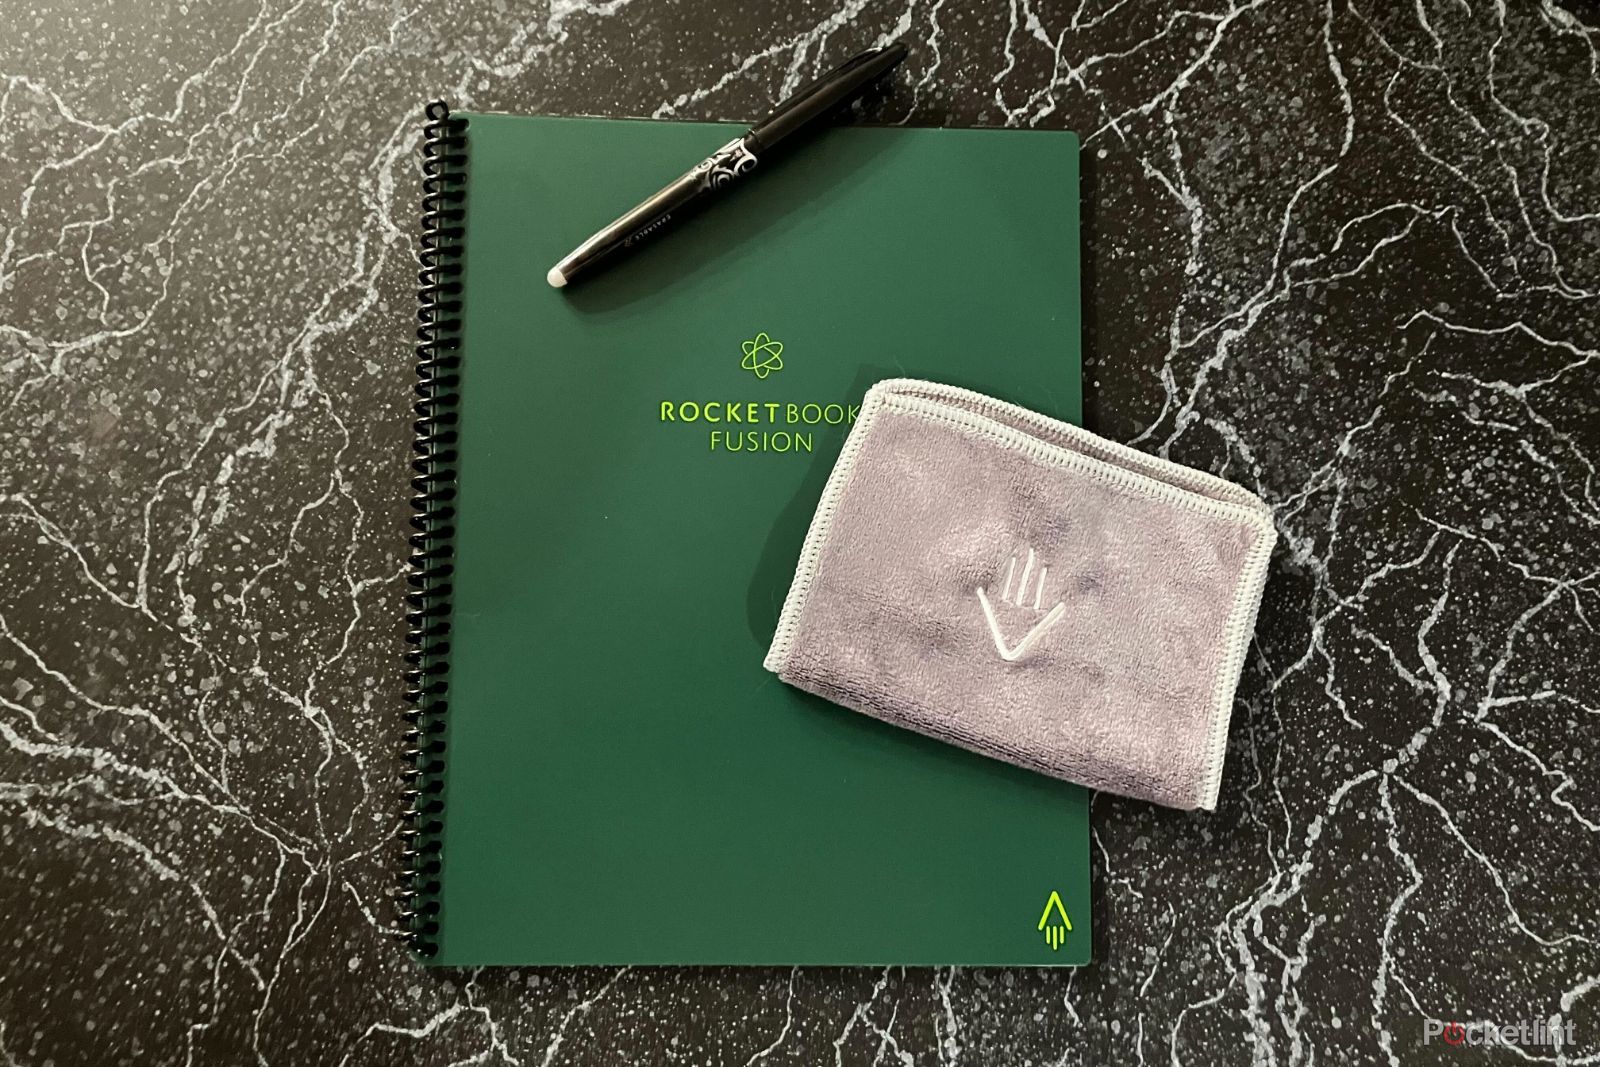 Green Rocketbook Fusion Notebook on black countertop with microfiber cloth and pen on top